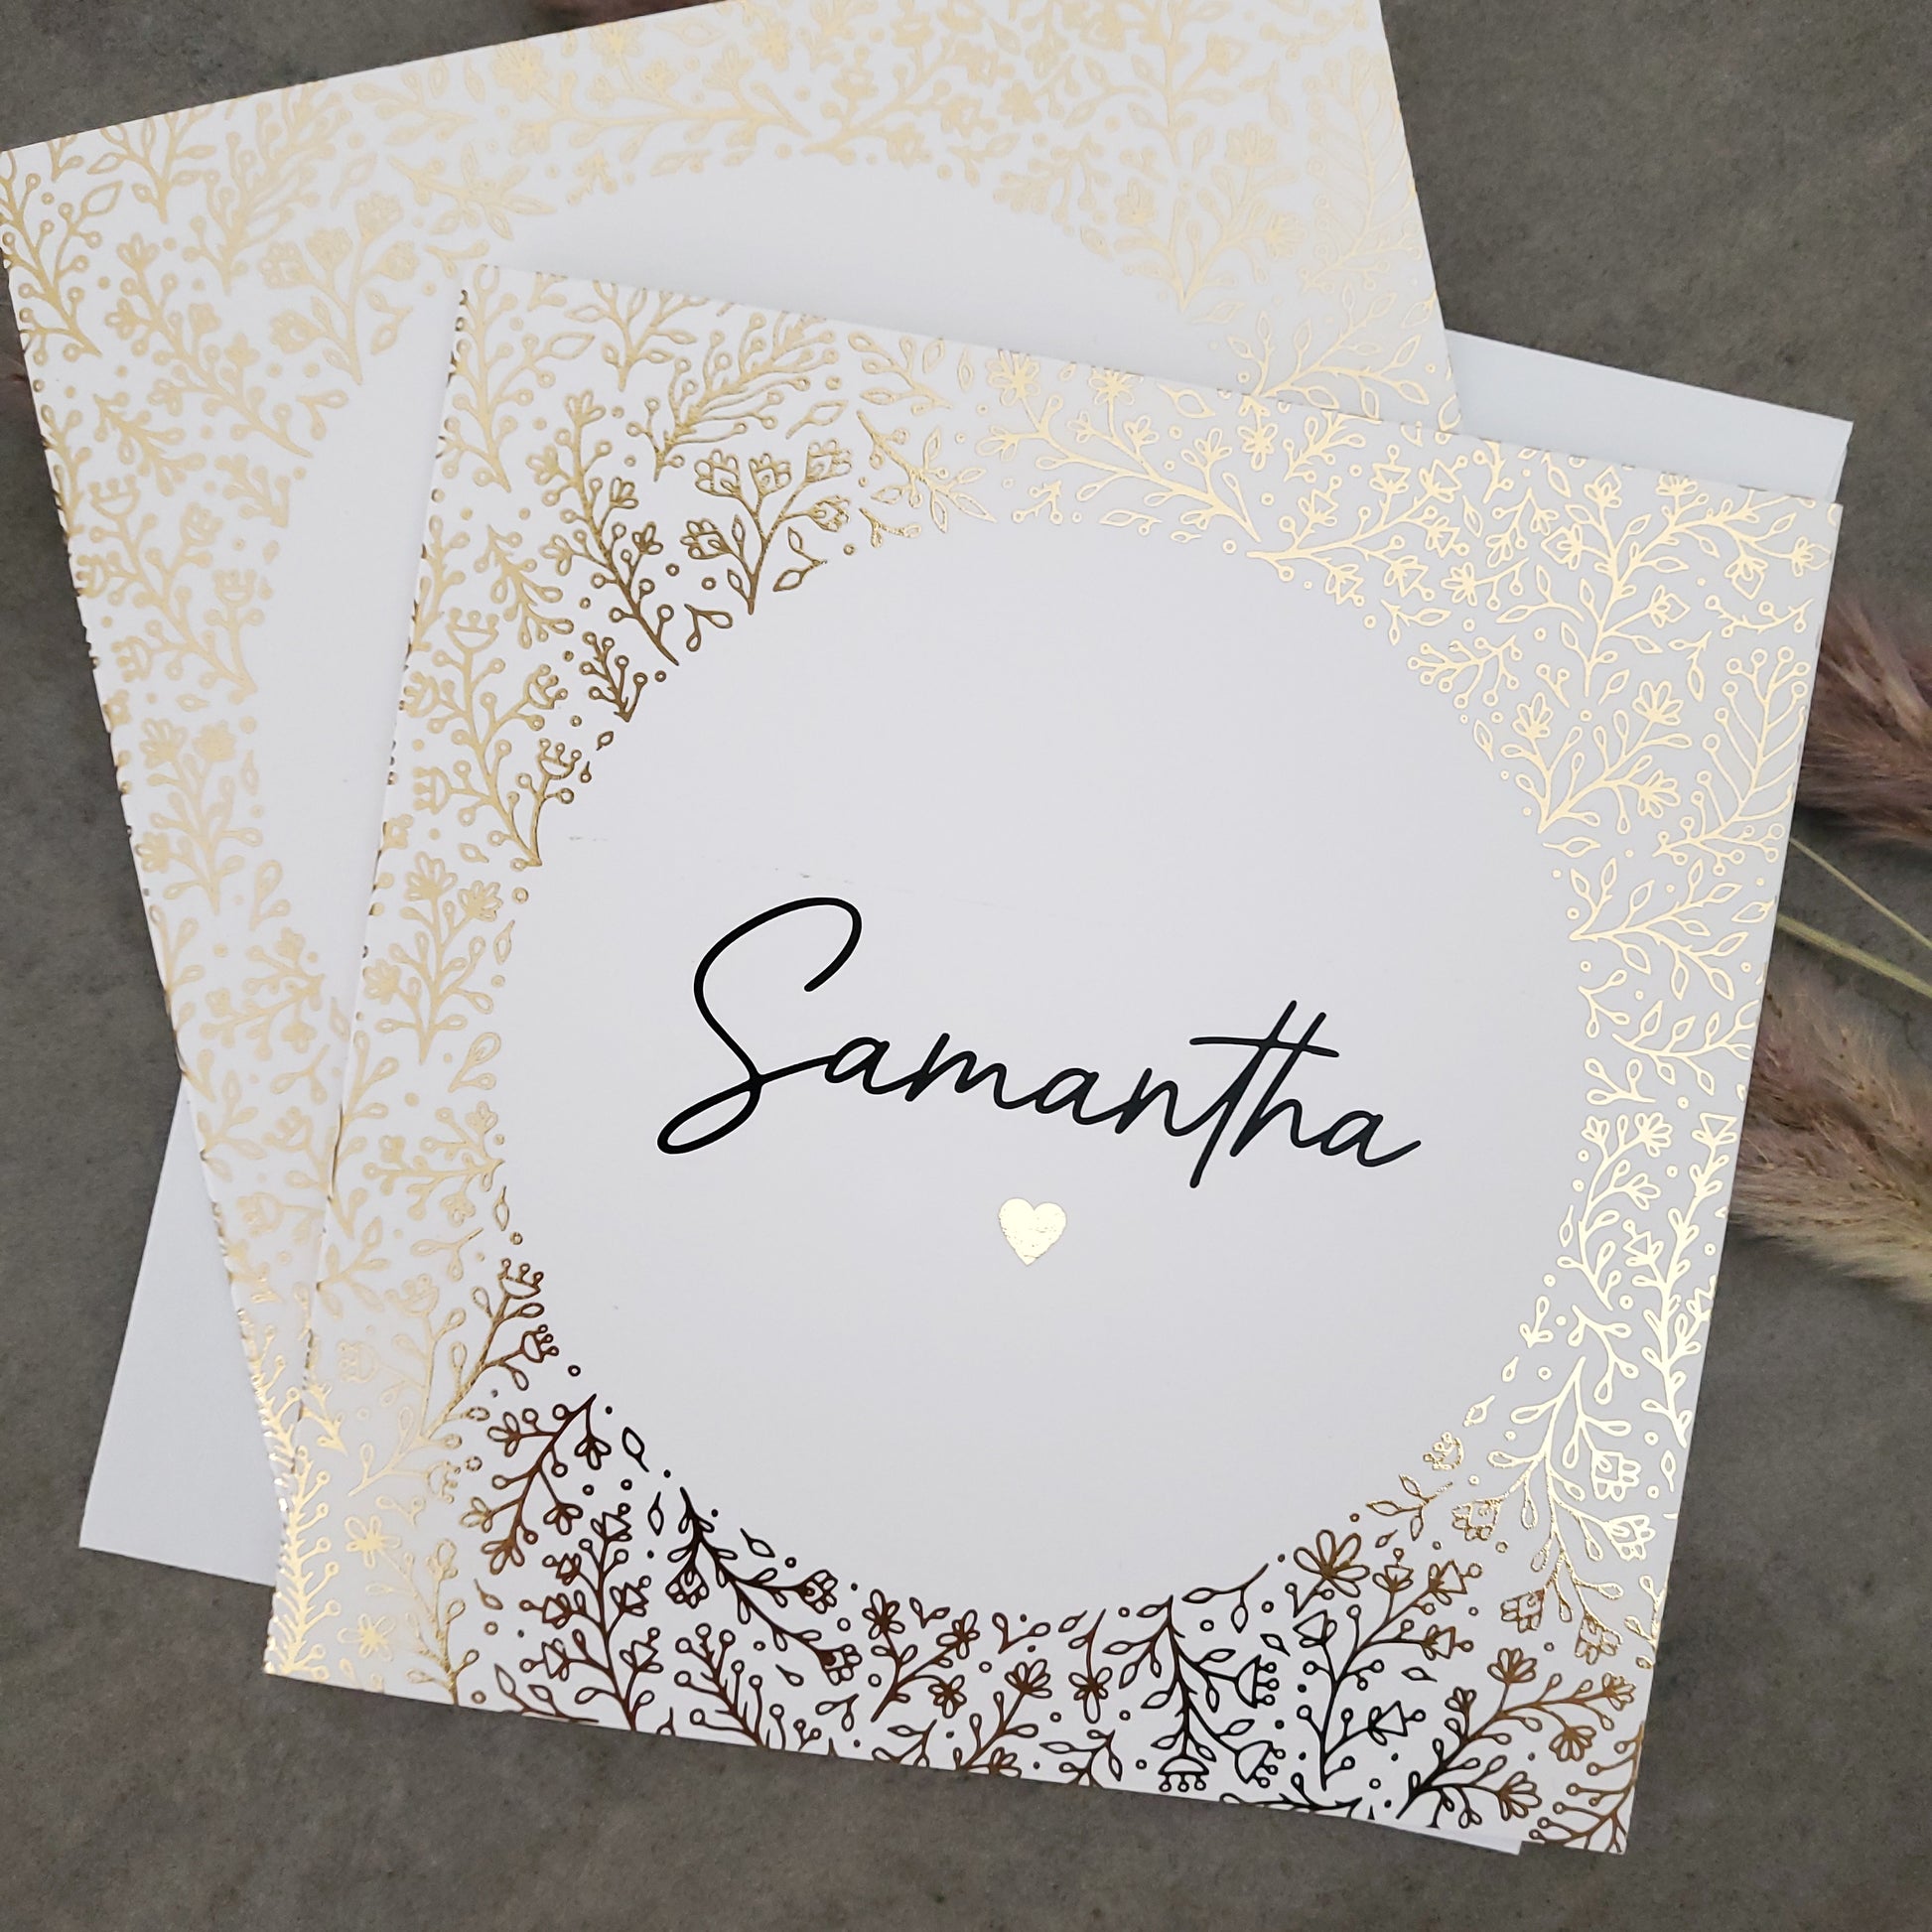 square white and gold bridesmaid proposal card personalized with a name - XOXOKristen